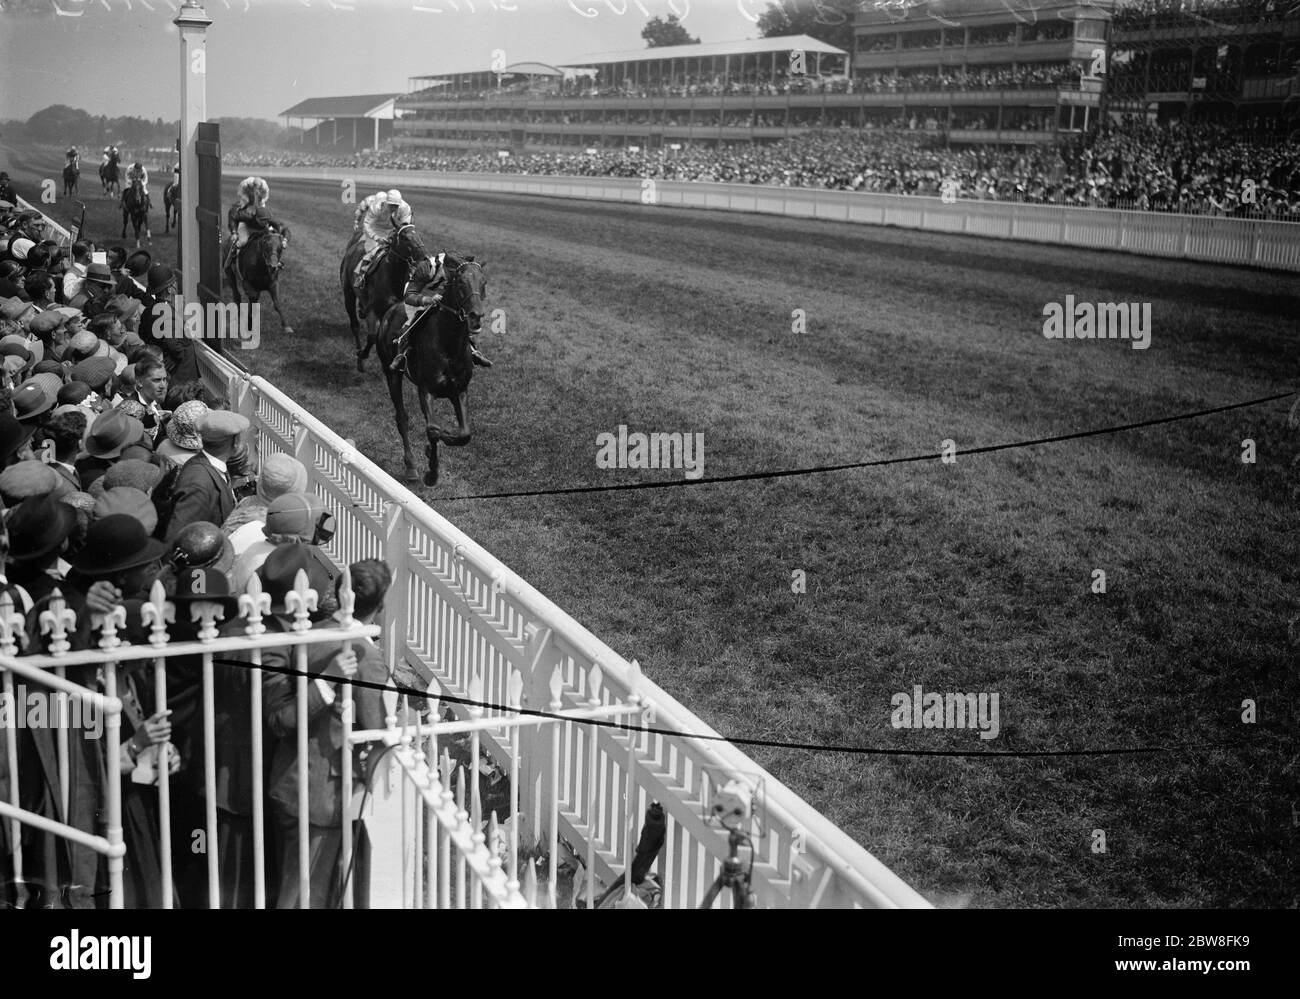 Gold Cup Race at Ascot . Brig Gen Charles Lambton 's  Trimdon  won the Gold Cup Race with Salmon Leap second and Ut Majeur third . J Childs rode the winner . The finish of the race . 16 June 1932 Stock Photo